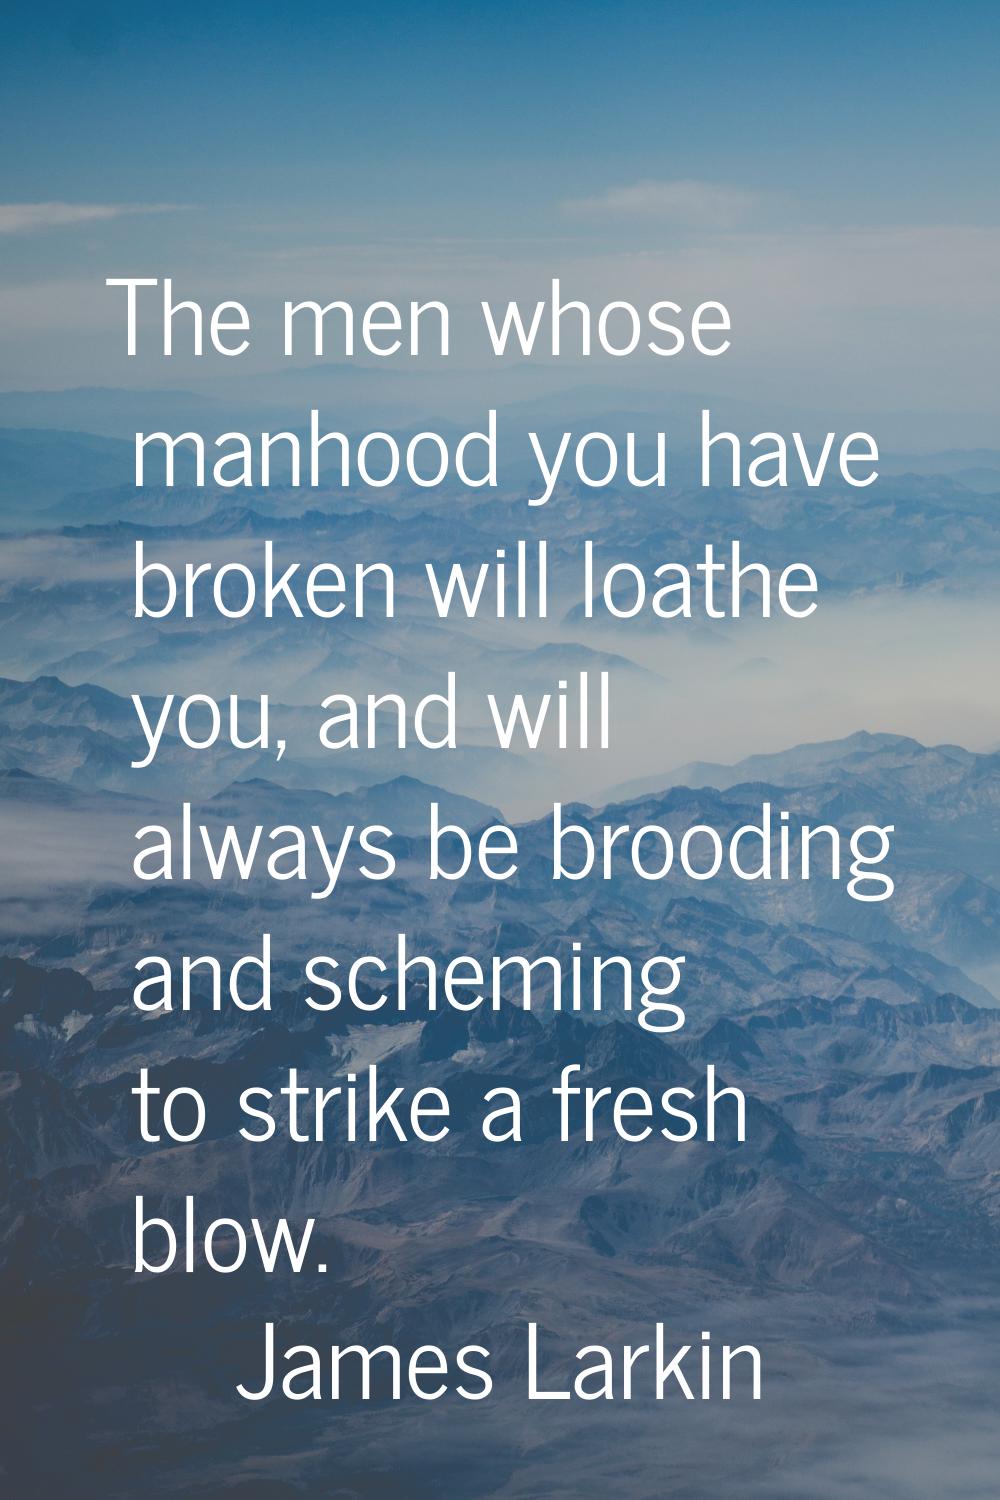 The men whose manhood you have broken will loathe you, and will always be brooding and scheming to 